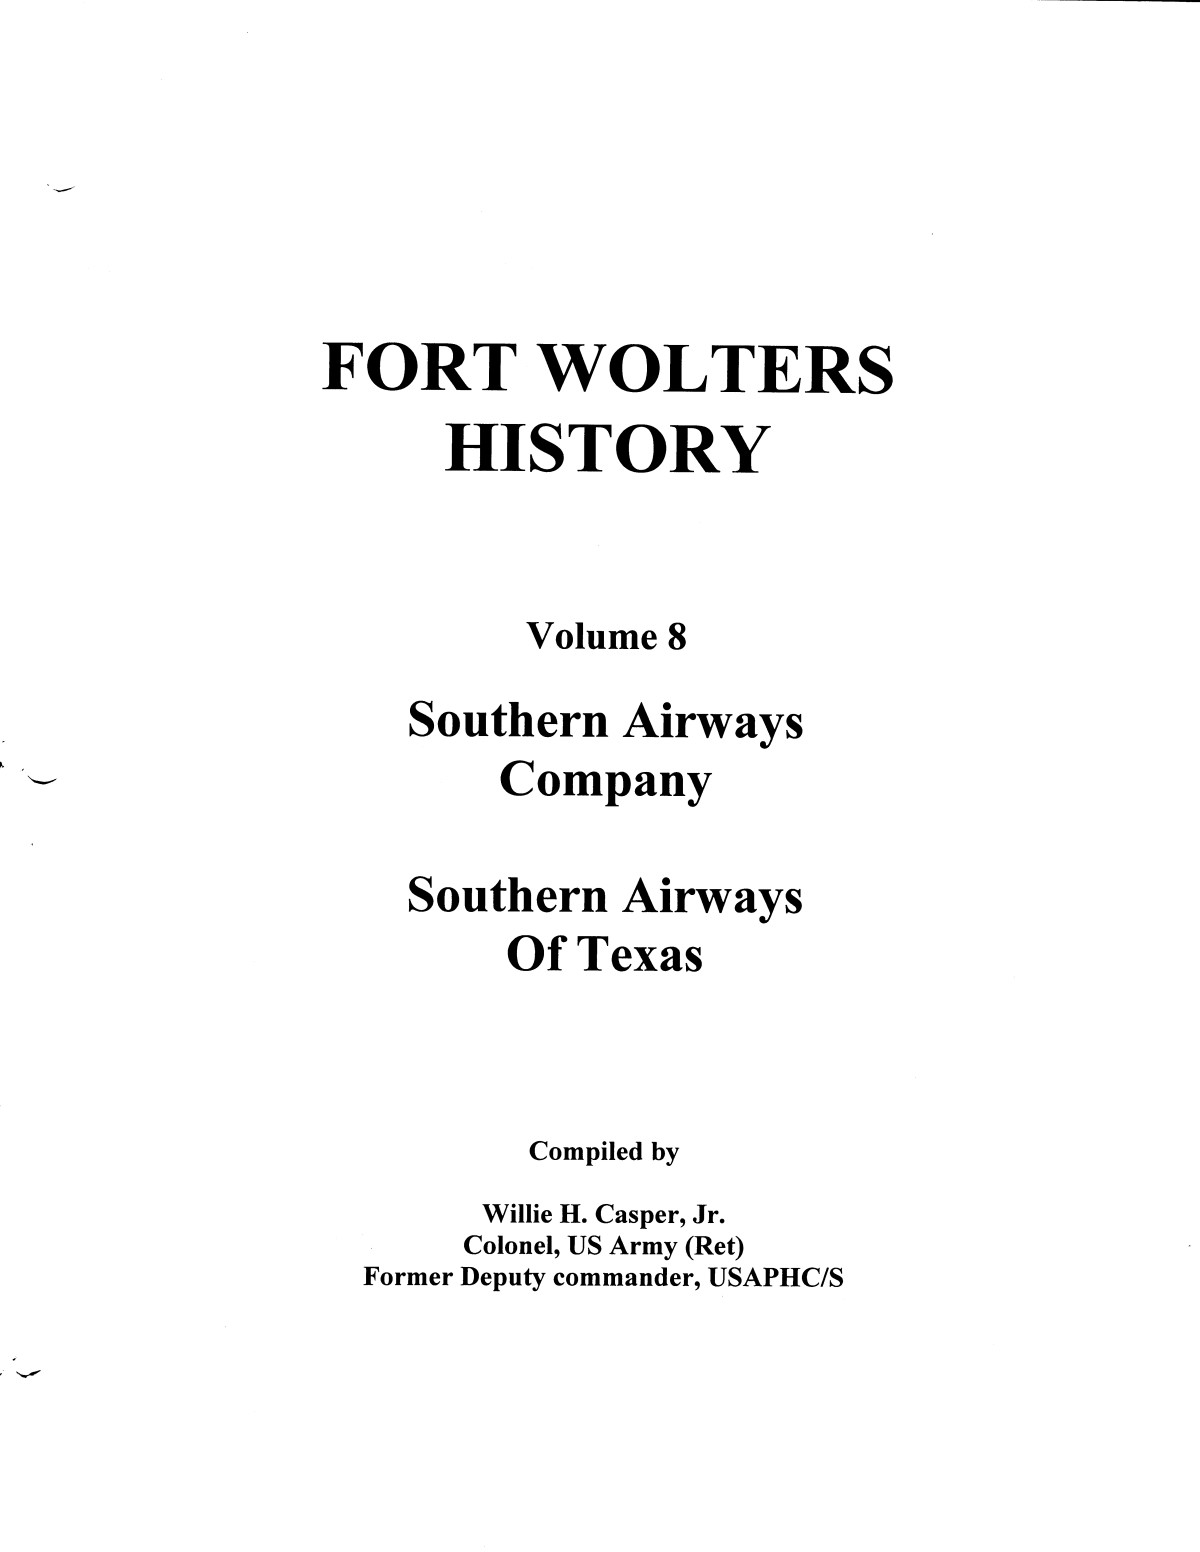 Pictorial History of Fort Wolters, Volume 8: Southern Airways Company, Southern Airways of Texas
                                                
                                                    [Sequence #]: 1 of 329
                                                